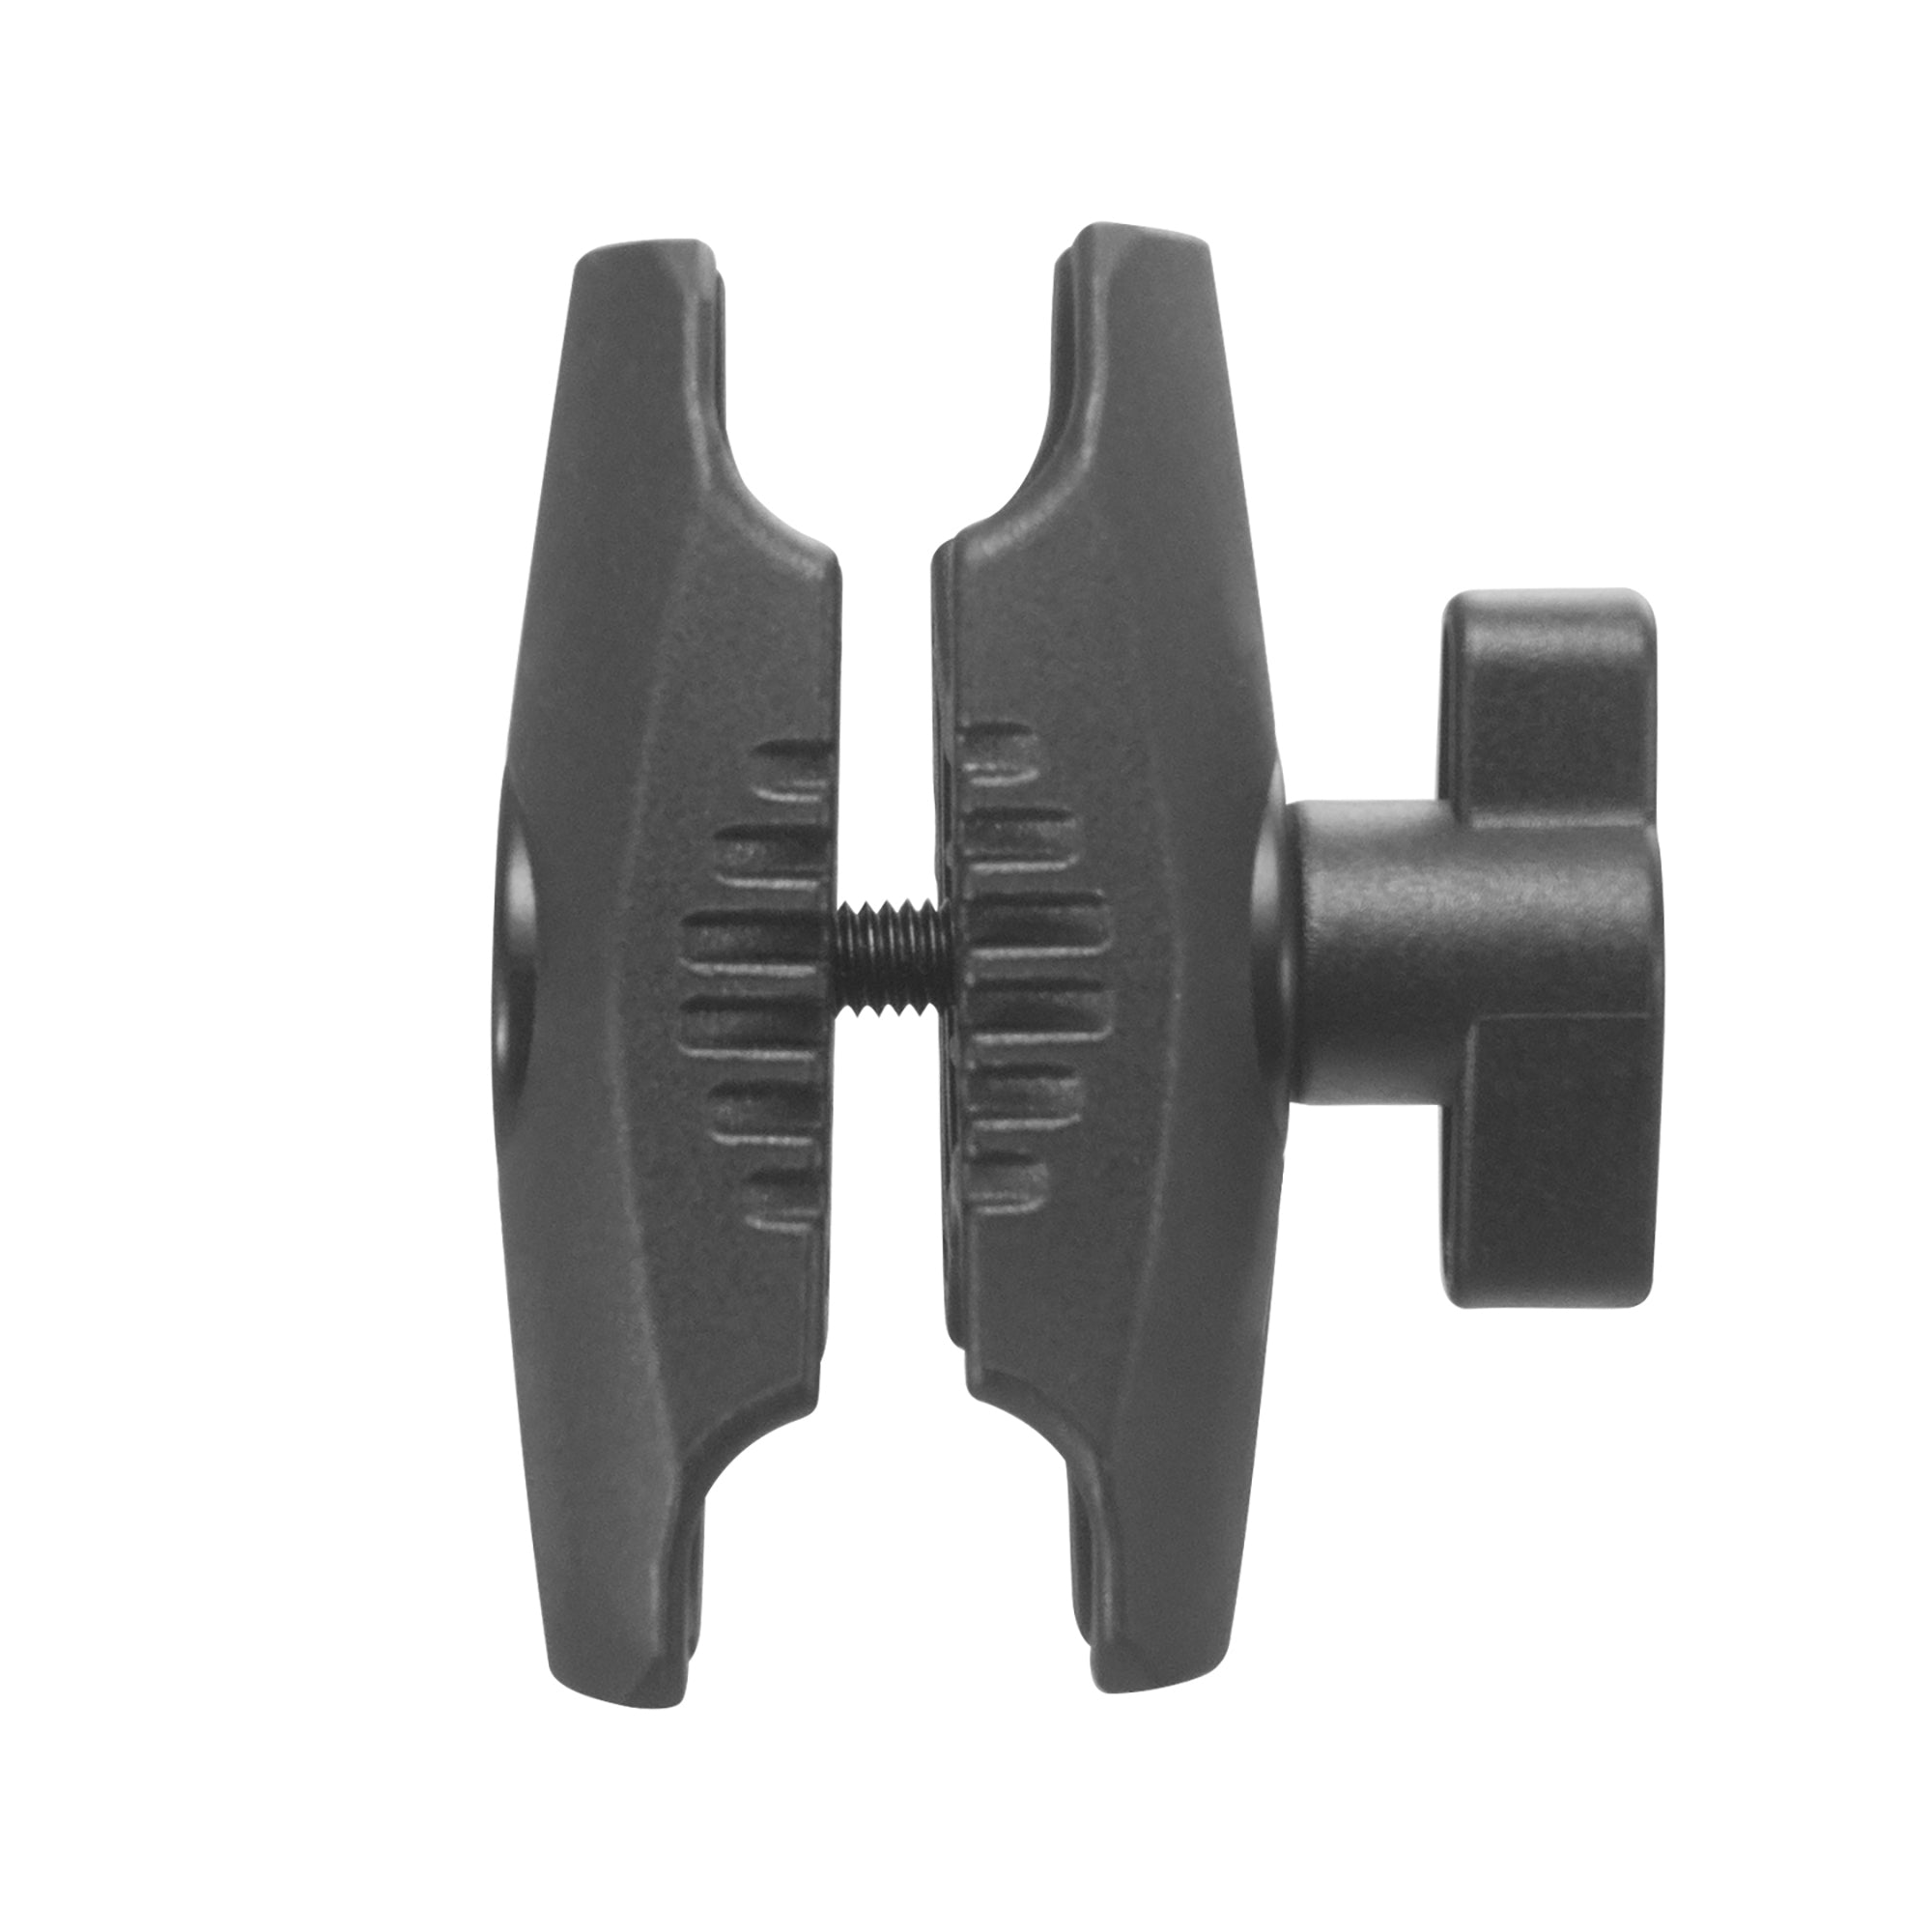 iBOLT™ Composite 2.75 inch Bizmount™ Double Socket Arm for 1-inch / 25mm / B Size Ball